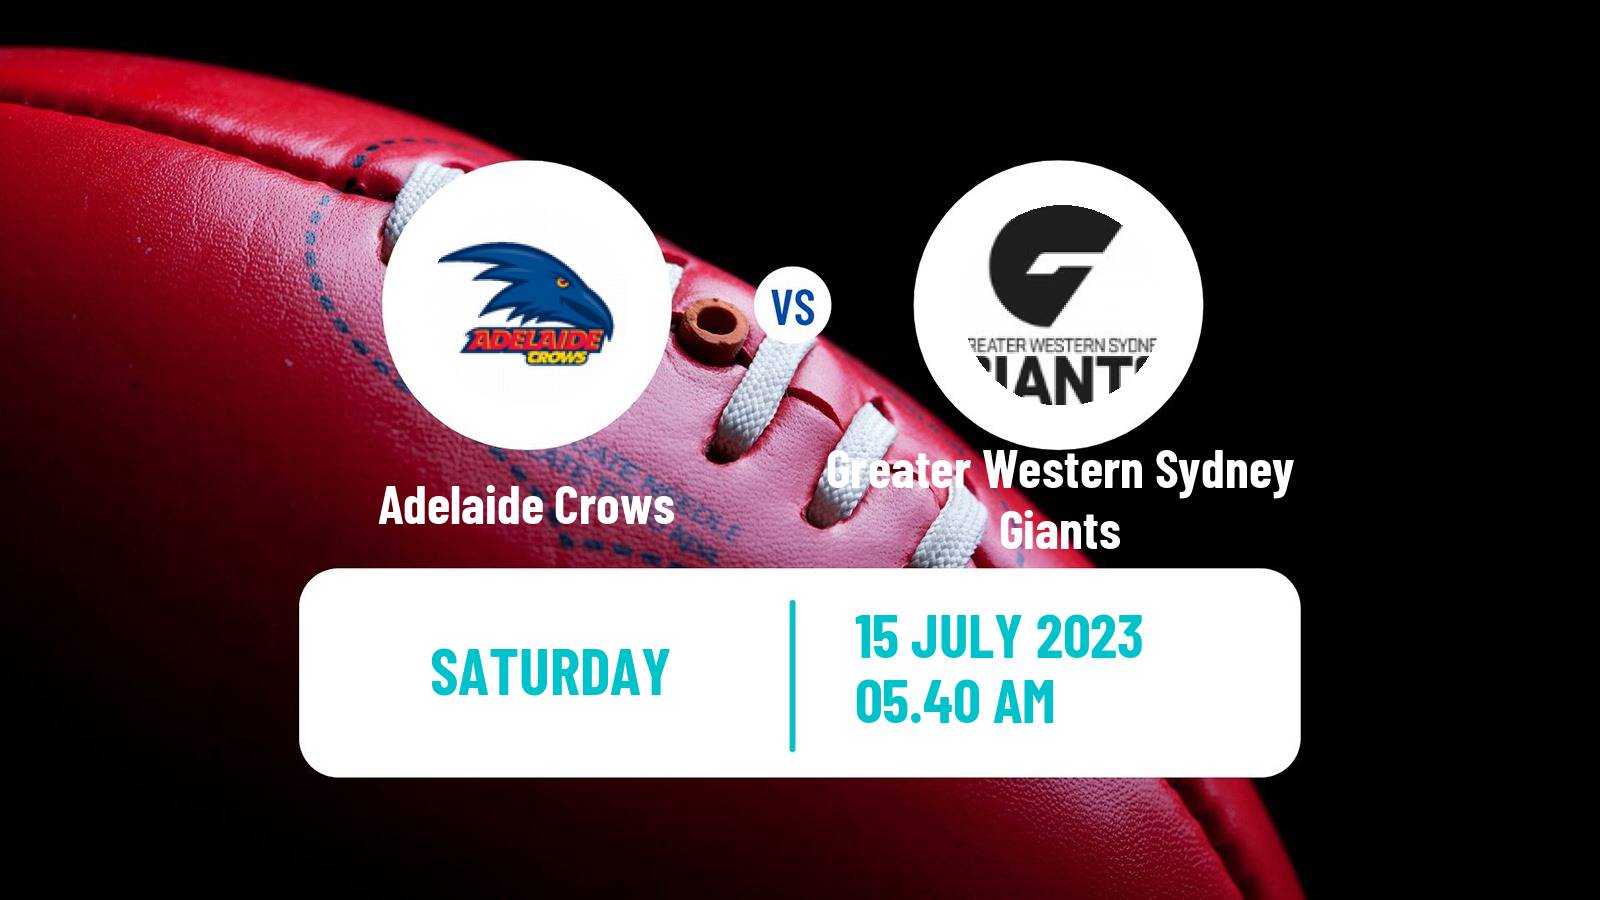 Aussie rules AFL Adelaide Crows - Greater Western Sydney Giants